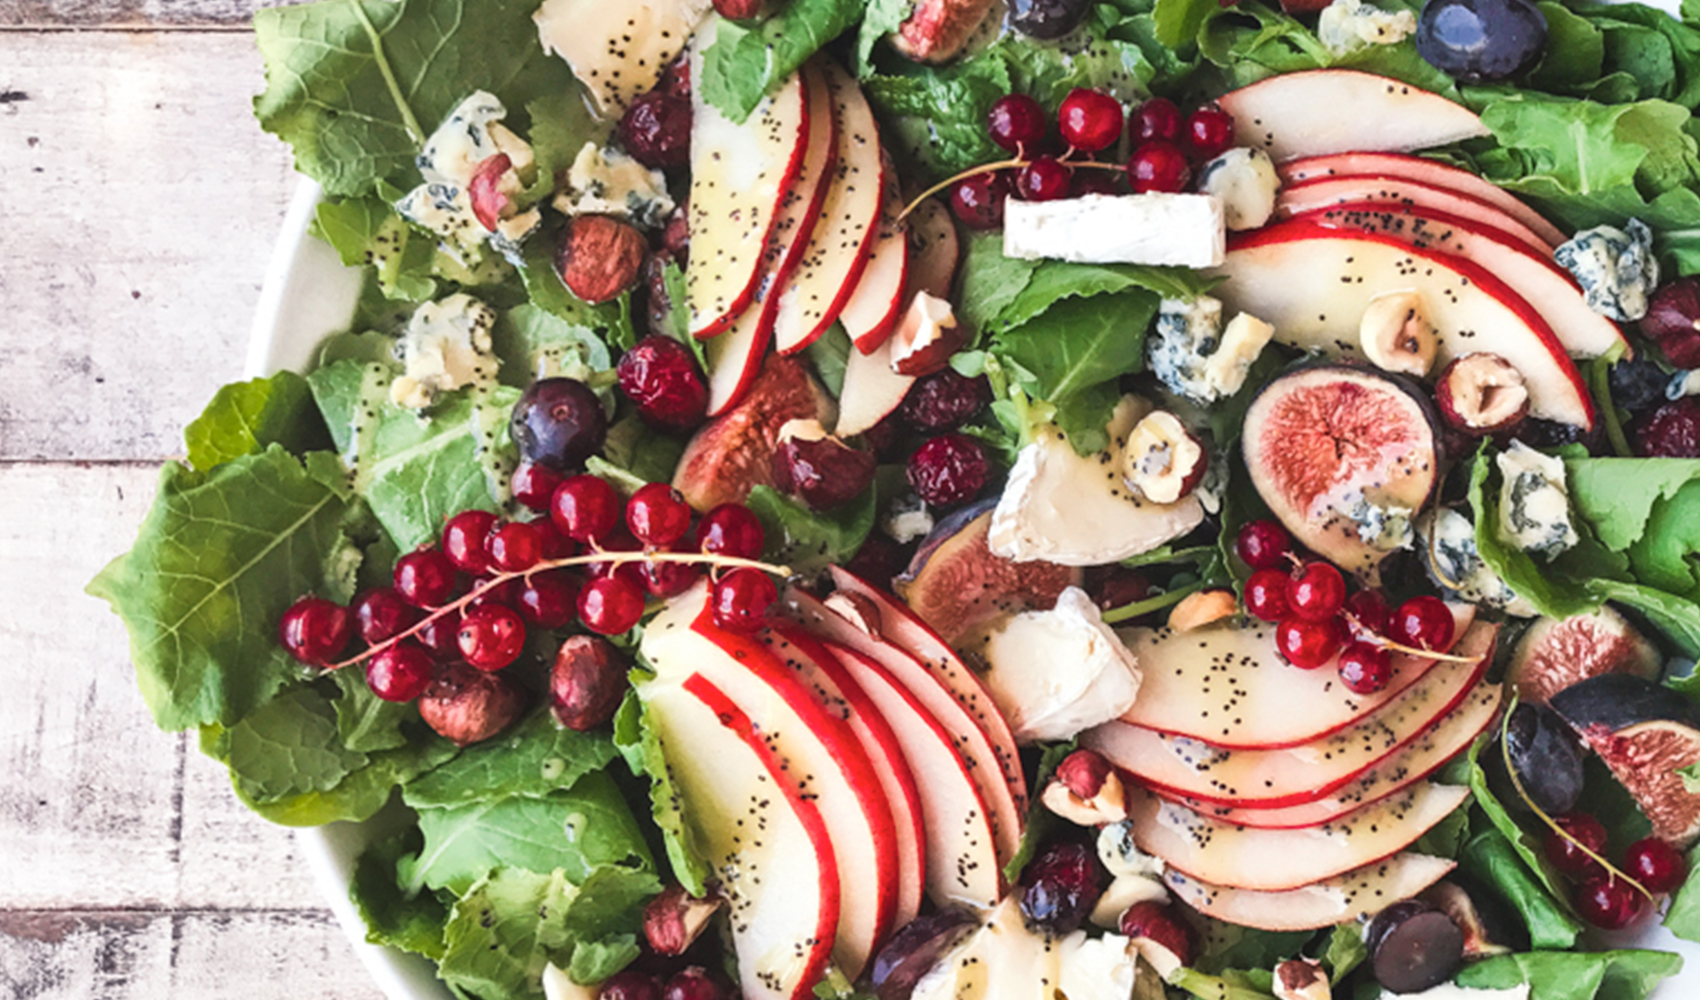 Kale and Fall Fruit Salad with Cider Poppy Seed Dressing